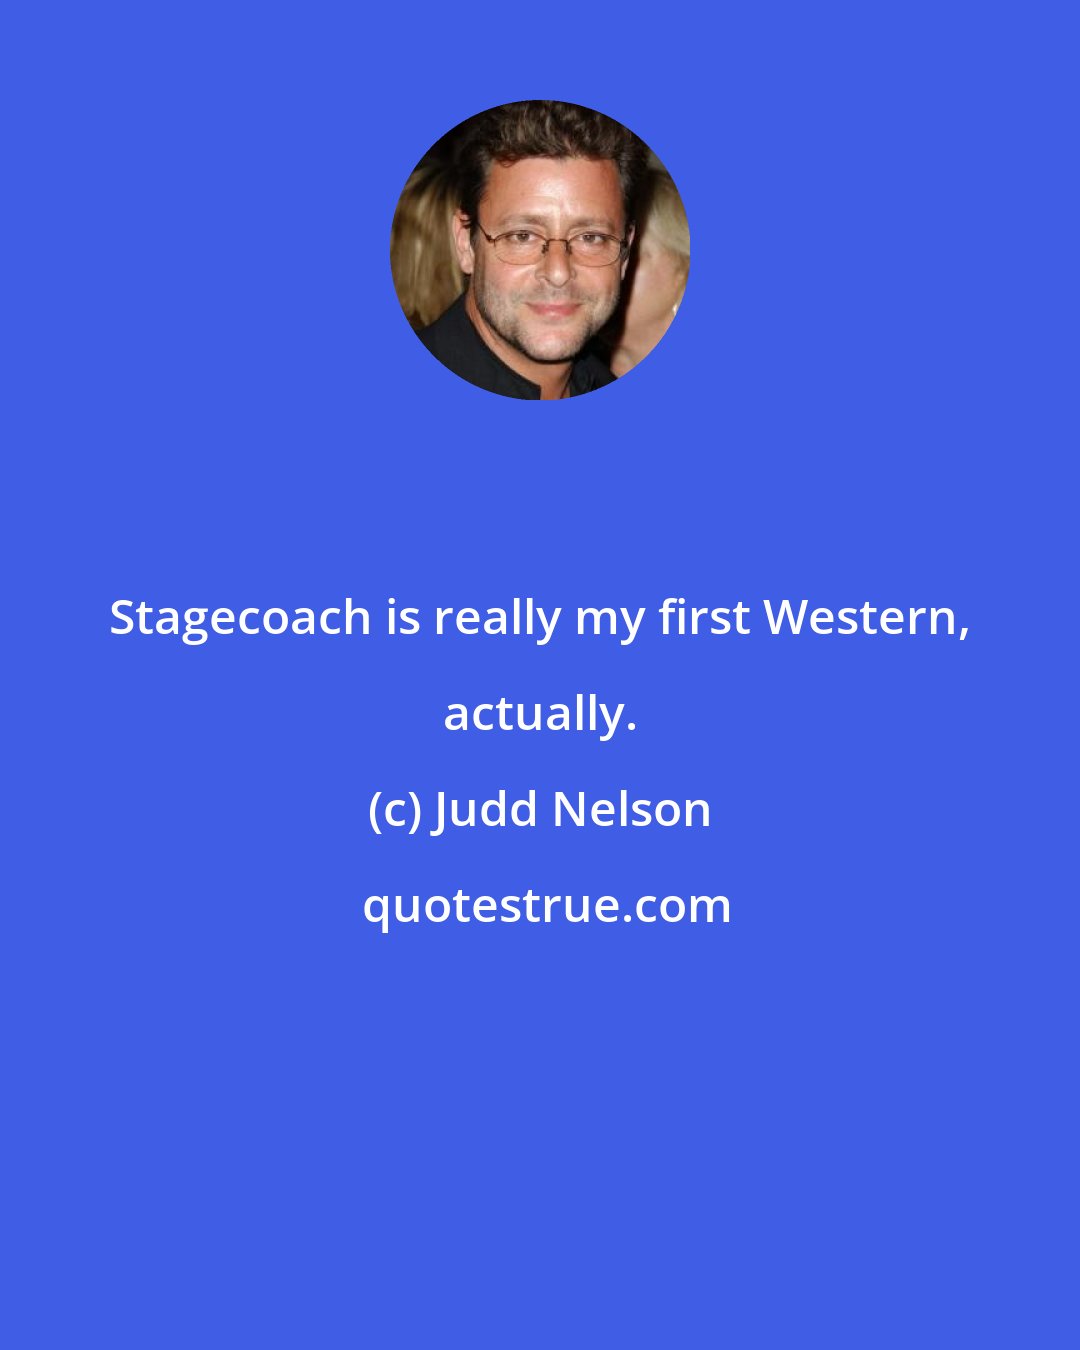 Judd Nelson: Stagecoach is really my first Western, actually.